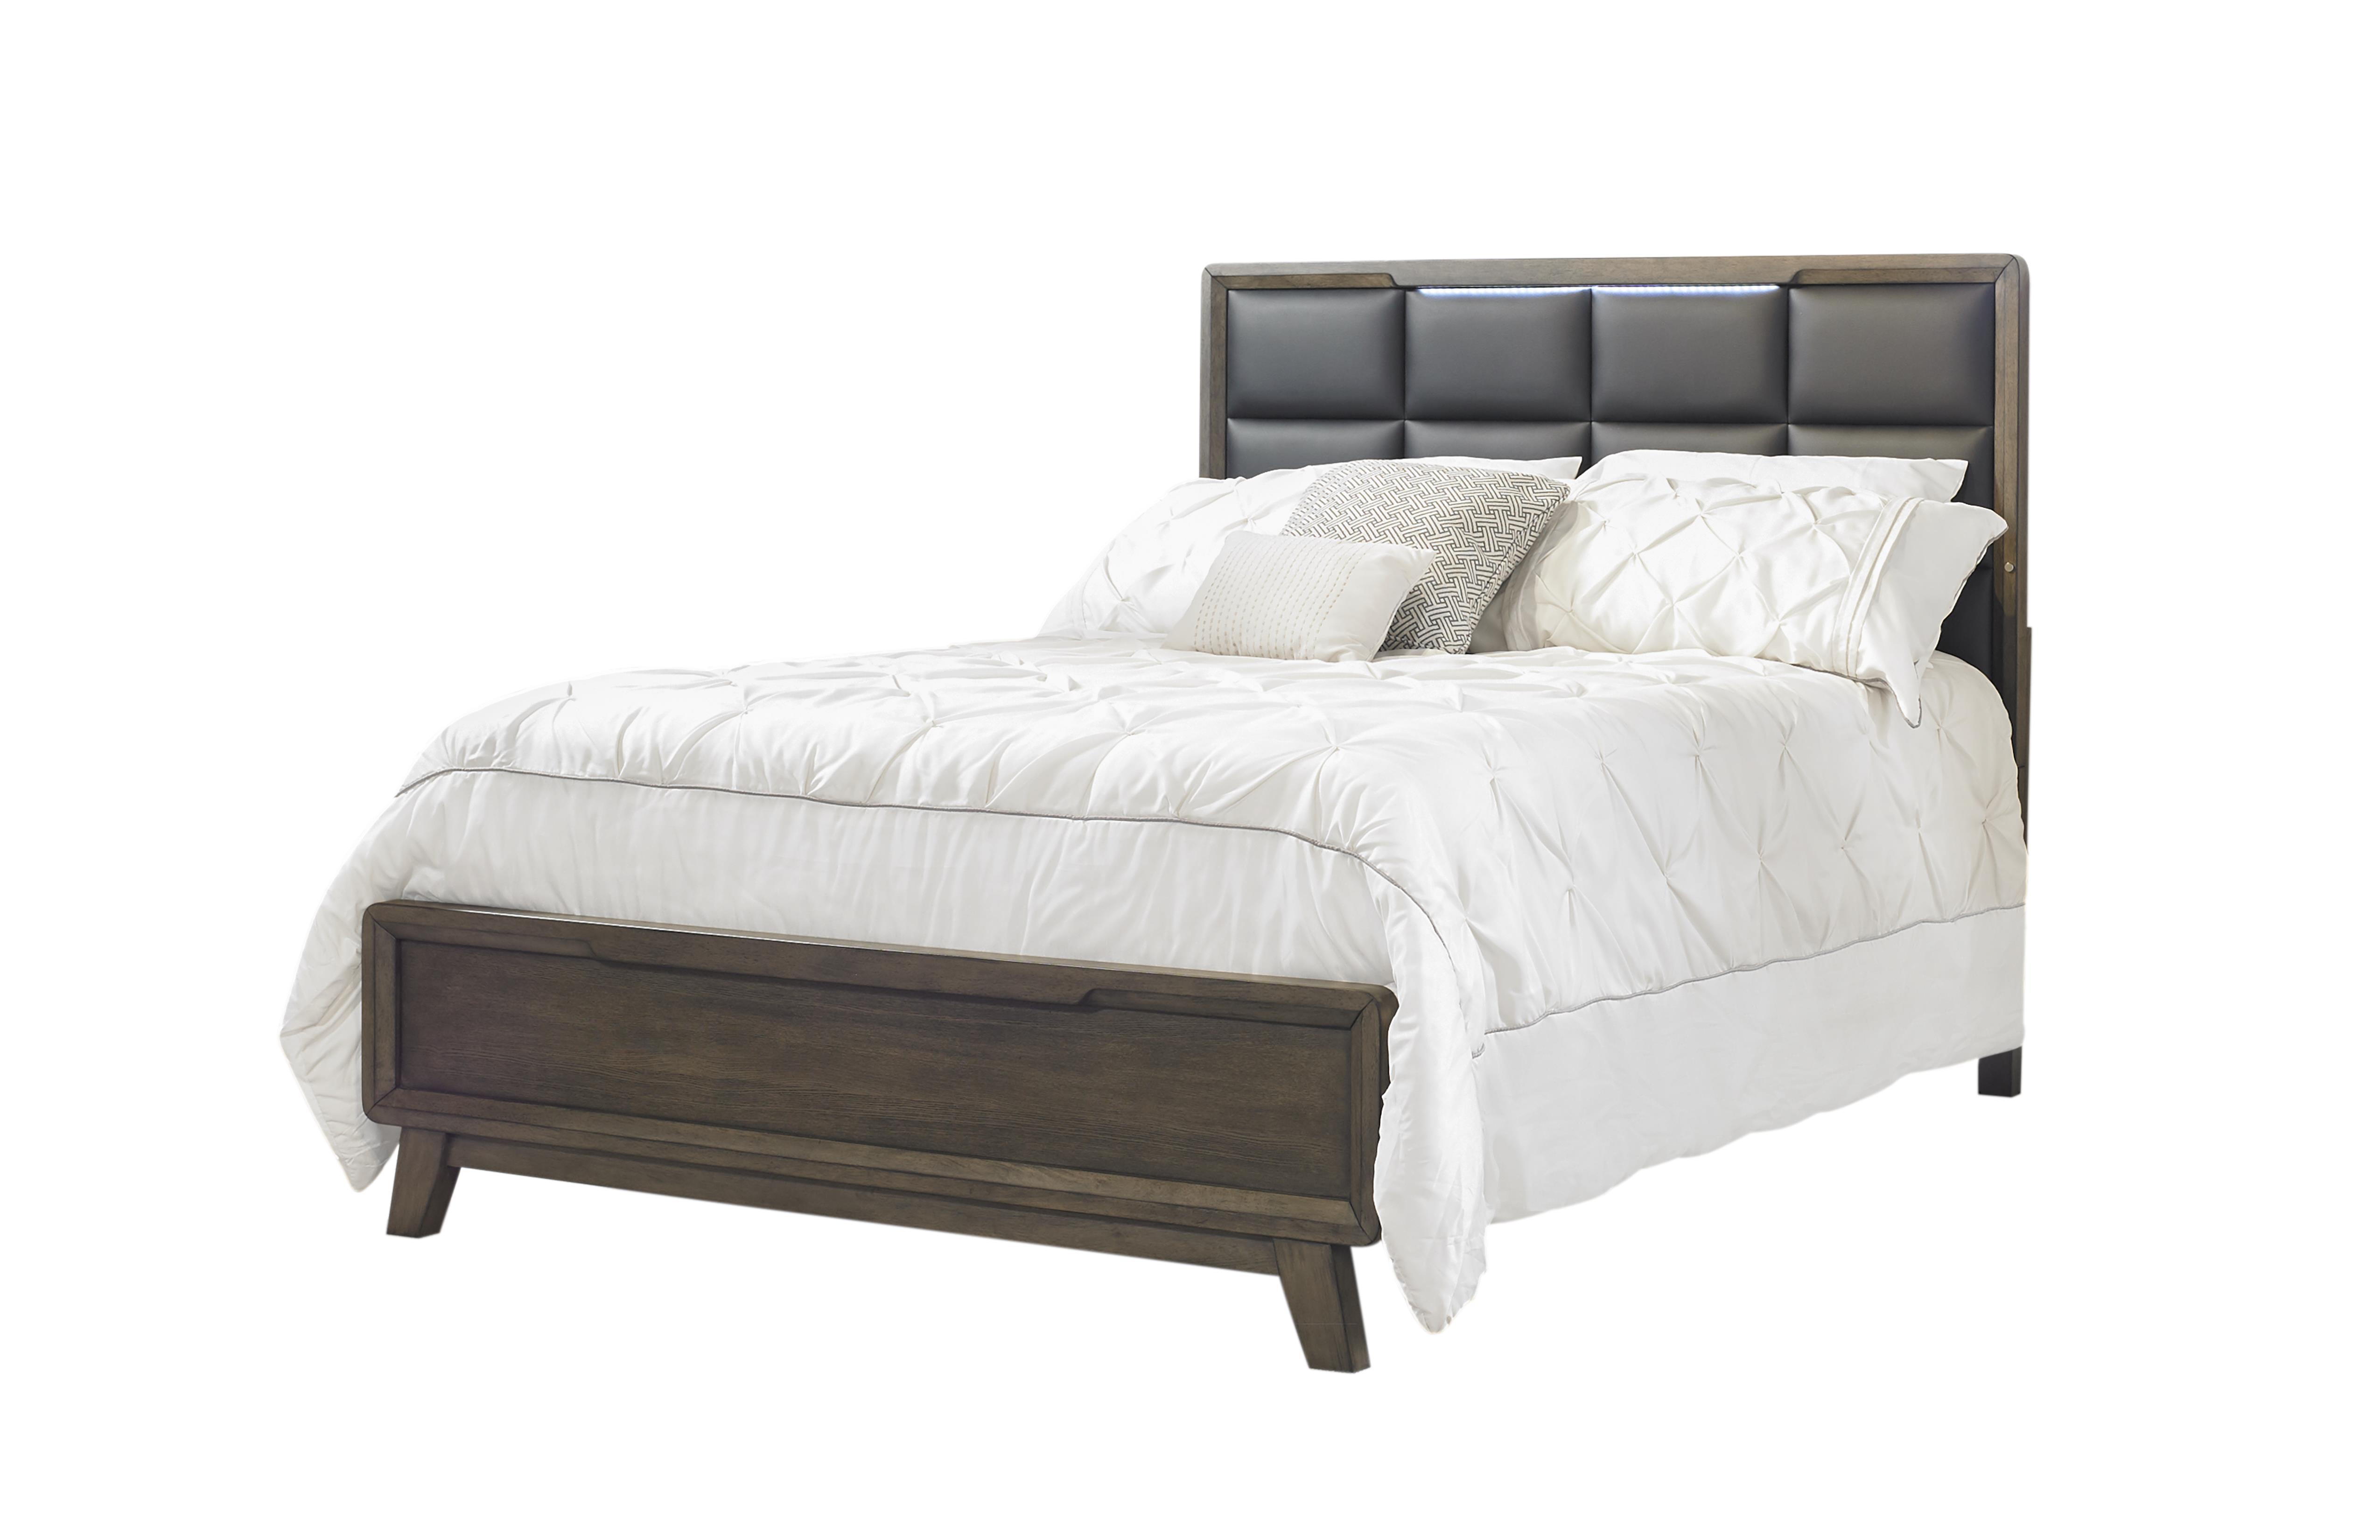 Contemporary, Modern Panel Bed VALENCIA 213-110 213-110 in Coffee, Brown Faux Leather